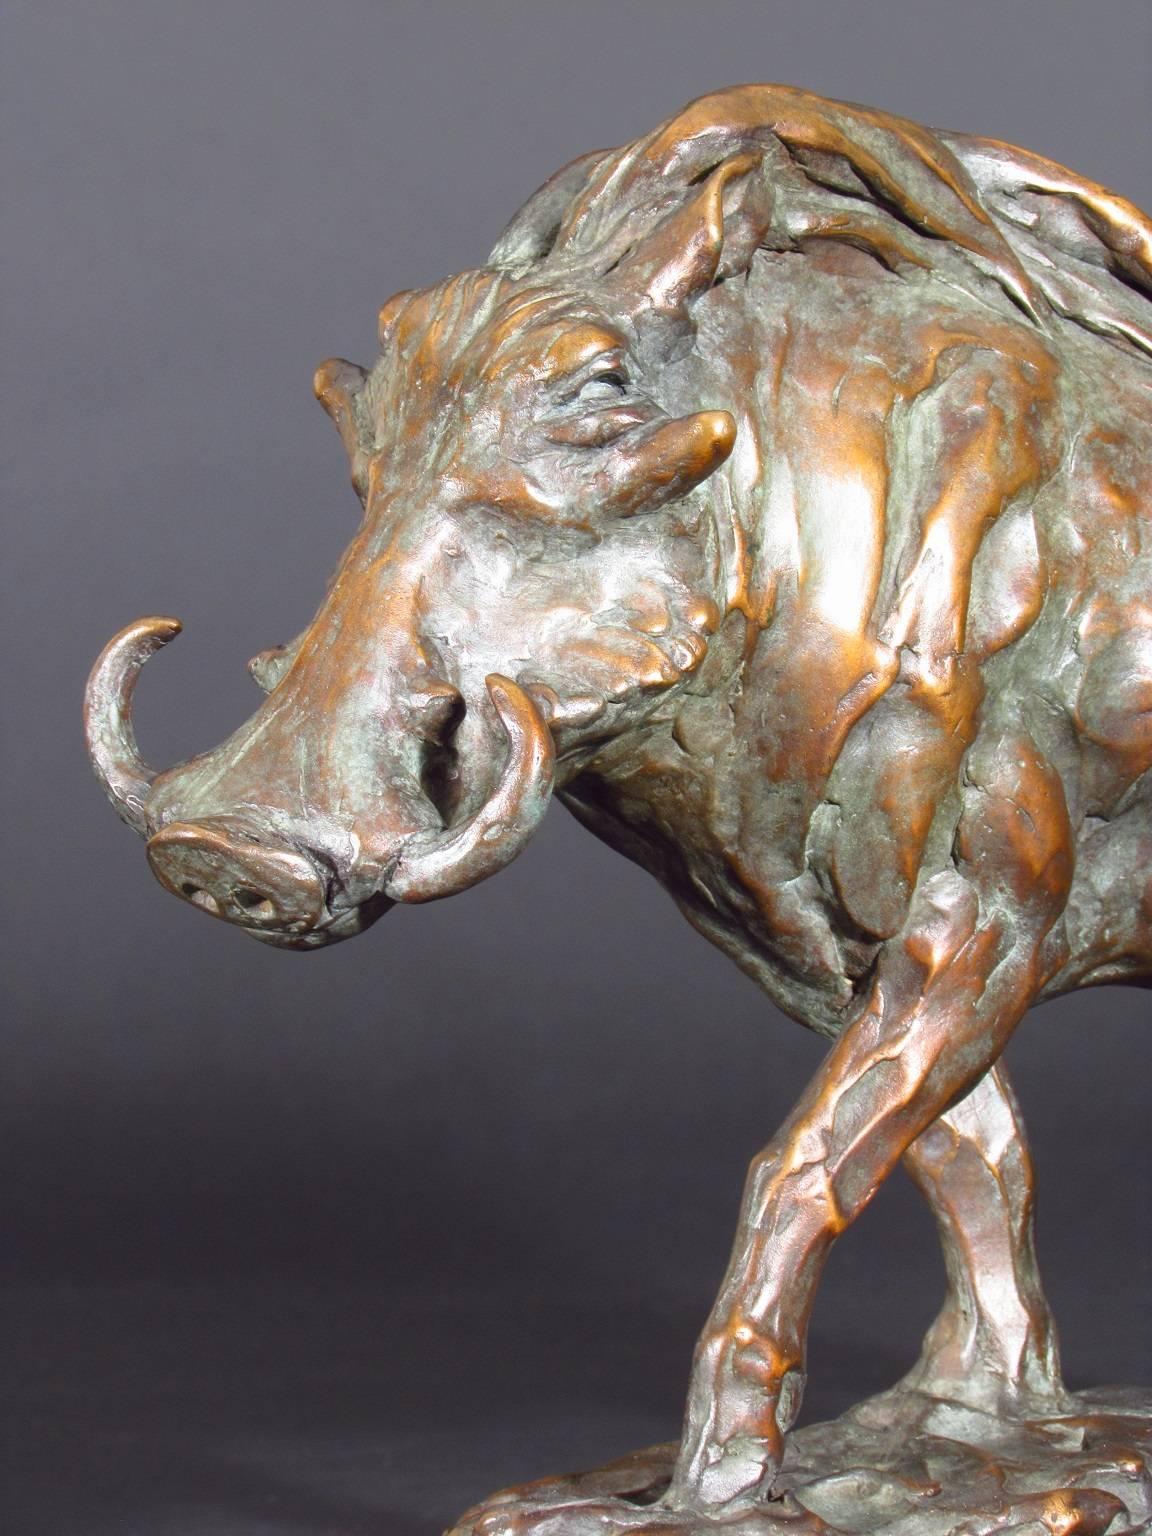 Limited edition contemporary bronze sculpture of a warthog.

Bronze on black granite base.

Signed: Robert Glen        Edition number: 4 of 10

Foundry: Mariani Art Foundry, Italy.

Issued with Certificate of Authenticity signed by Robert